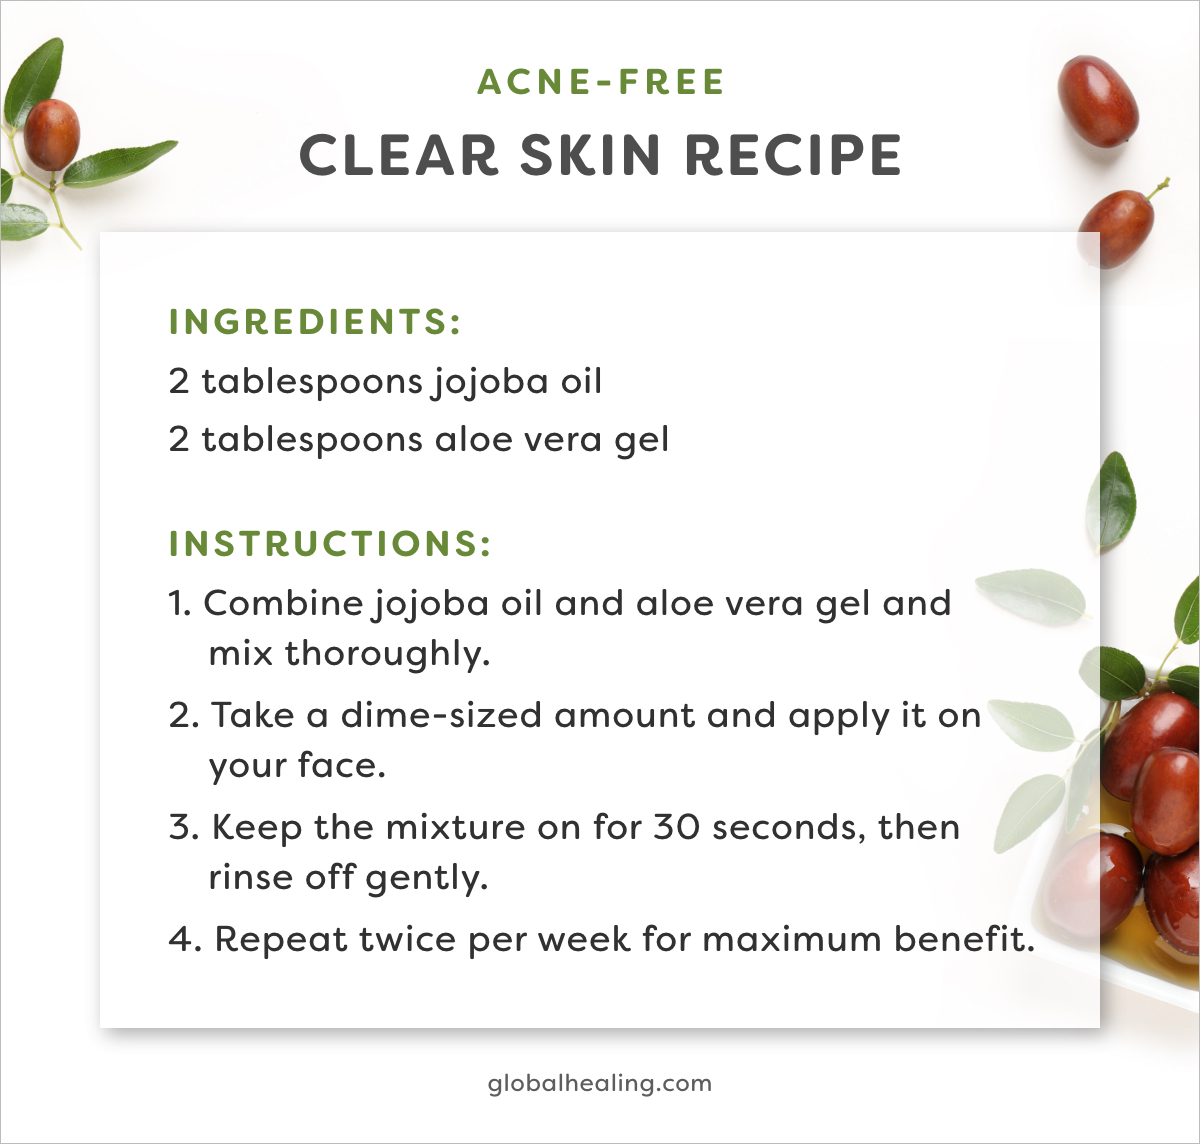 Try this clear skin recipe that'll transform your skin.